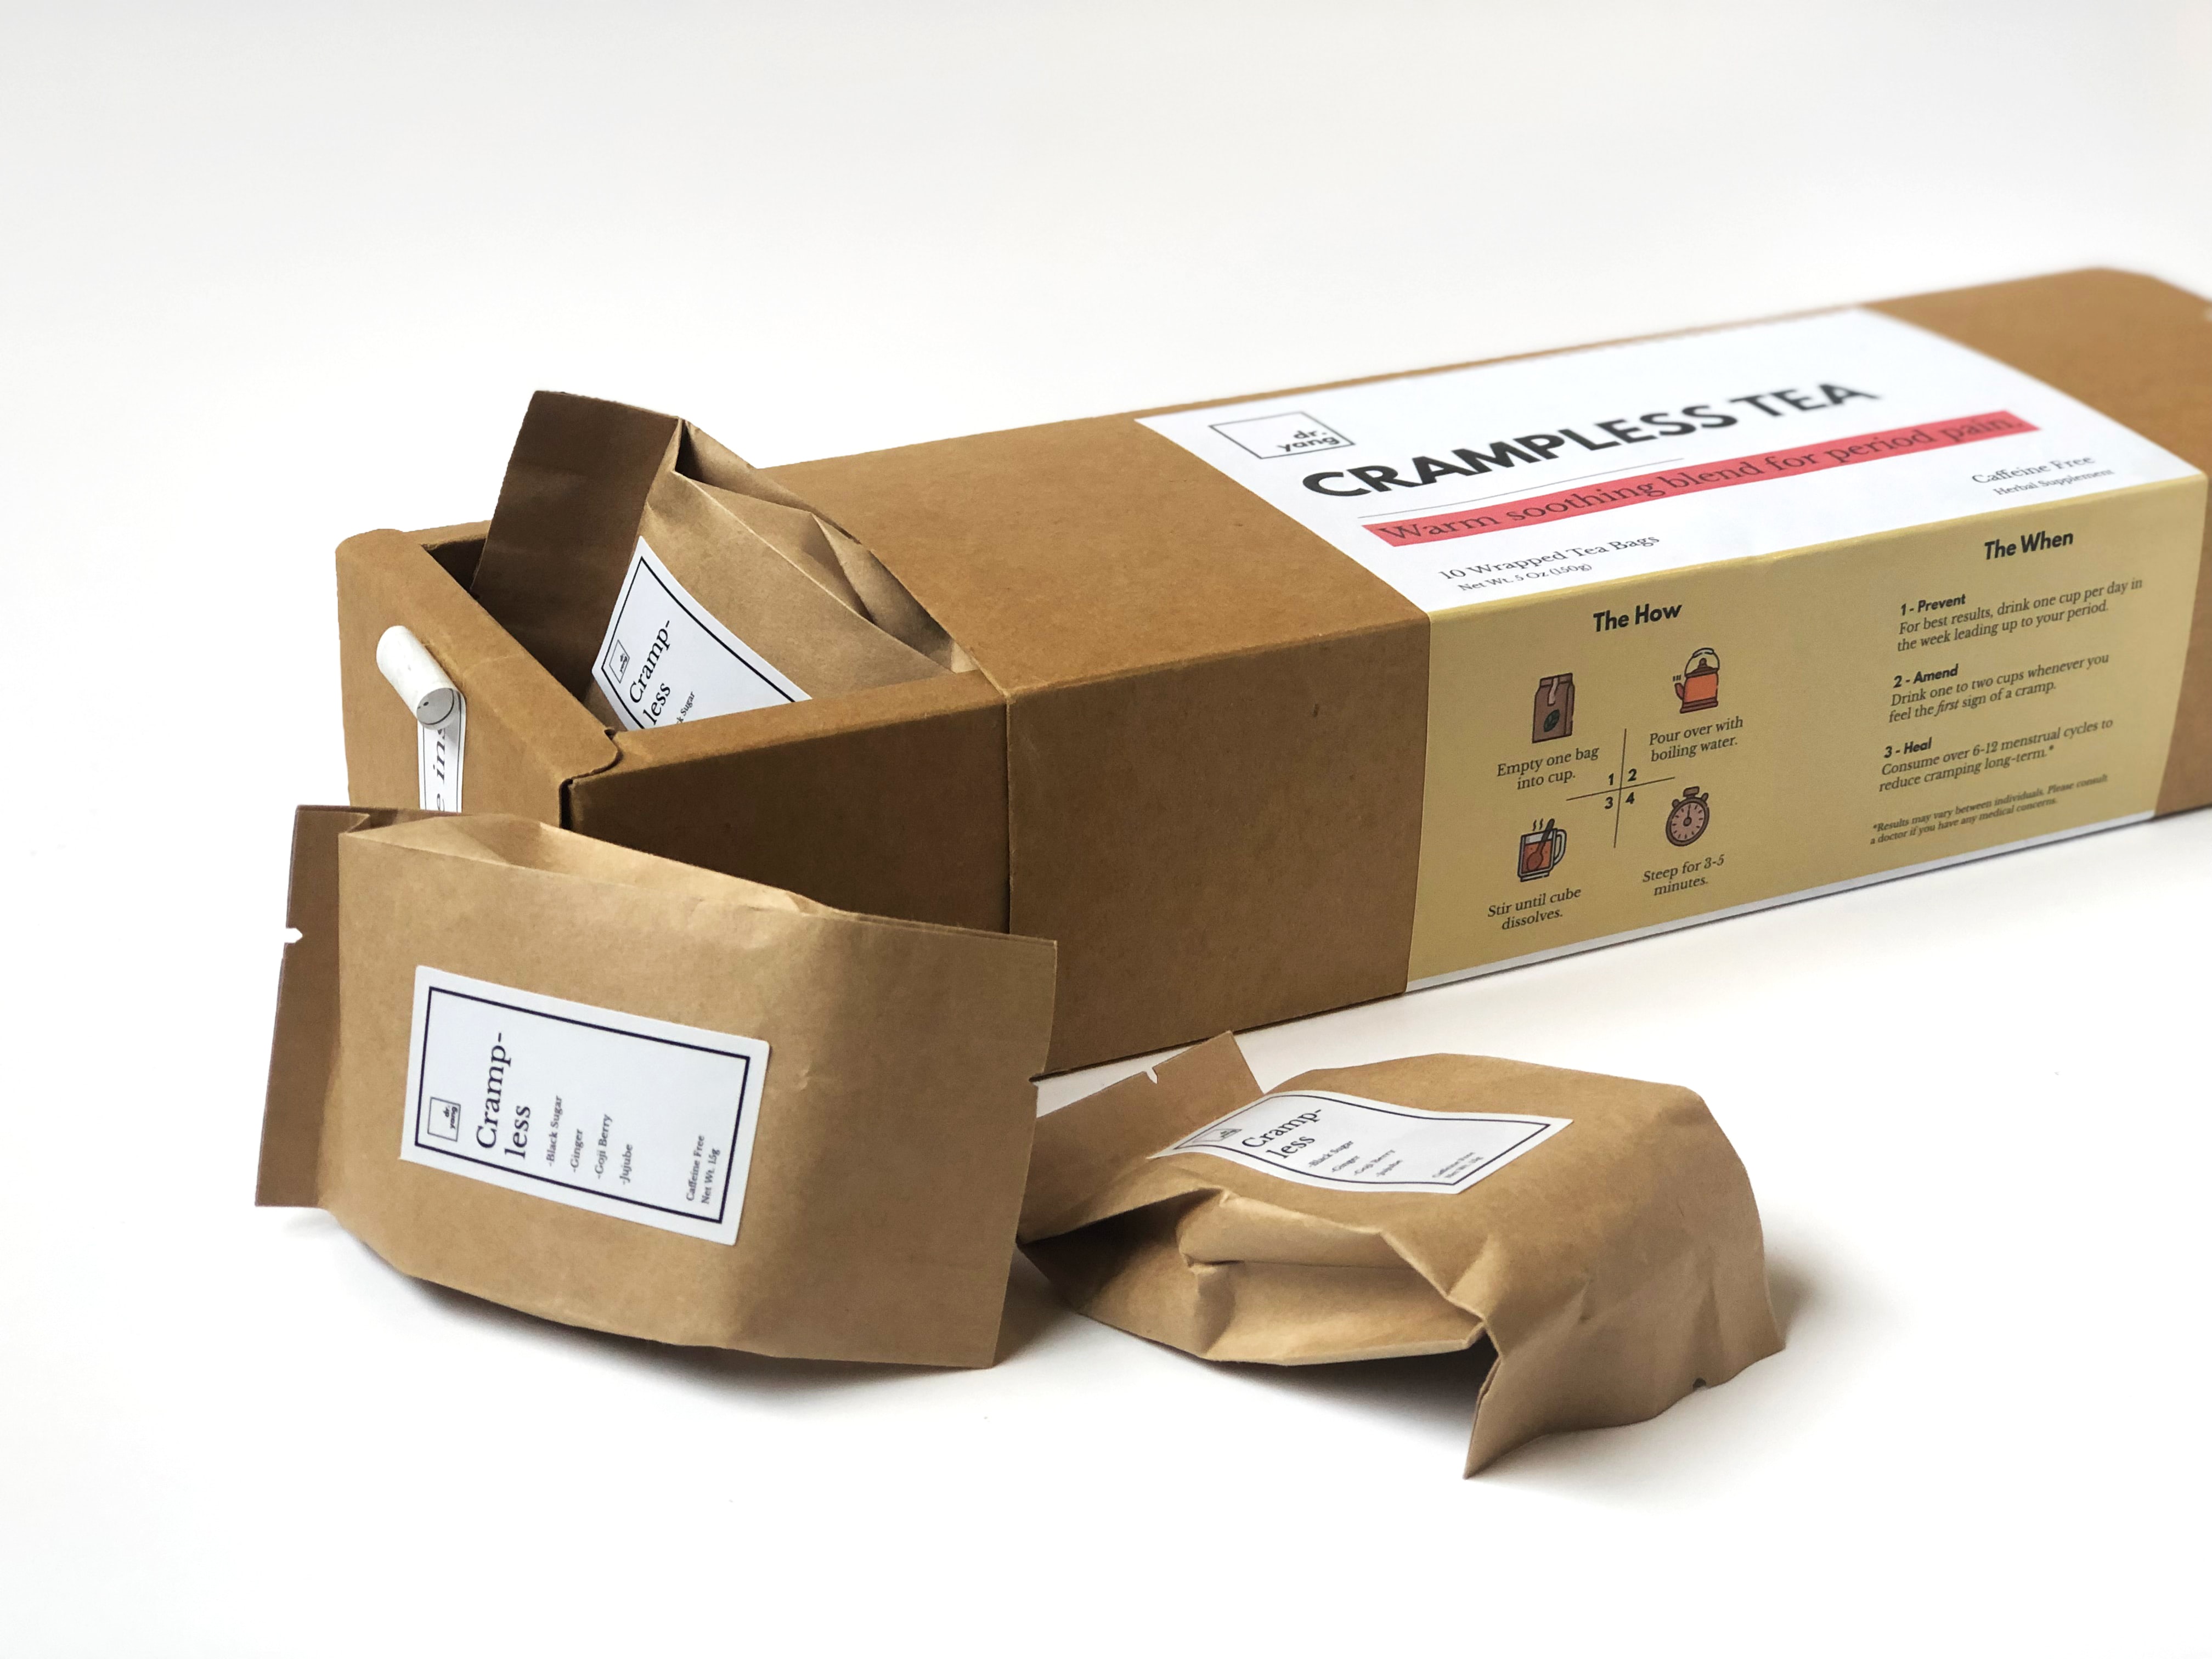 Carbon Footprint of a Cardboard Box - Consumer Ecology